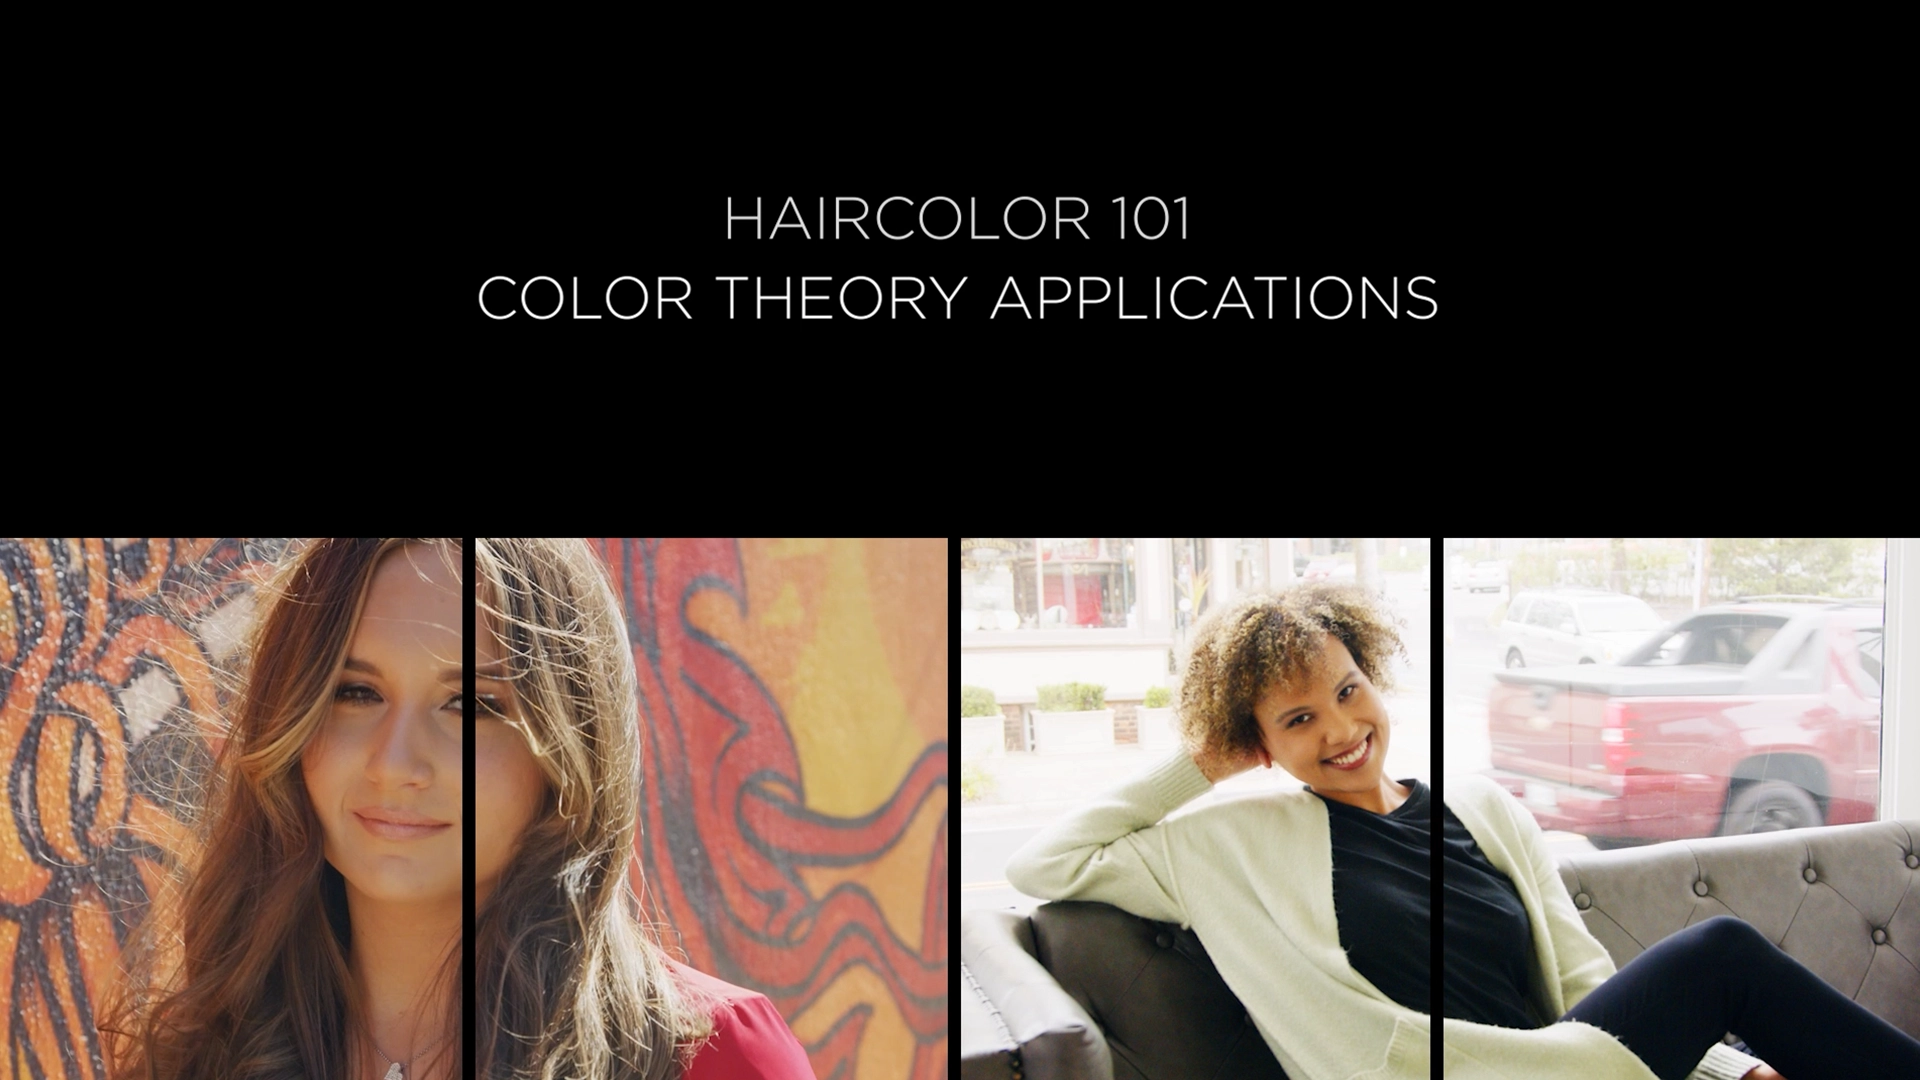 Hair Color Theory Applications splash screen